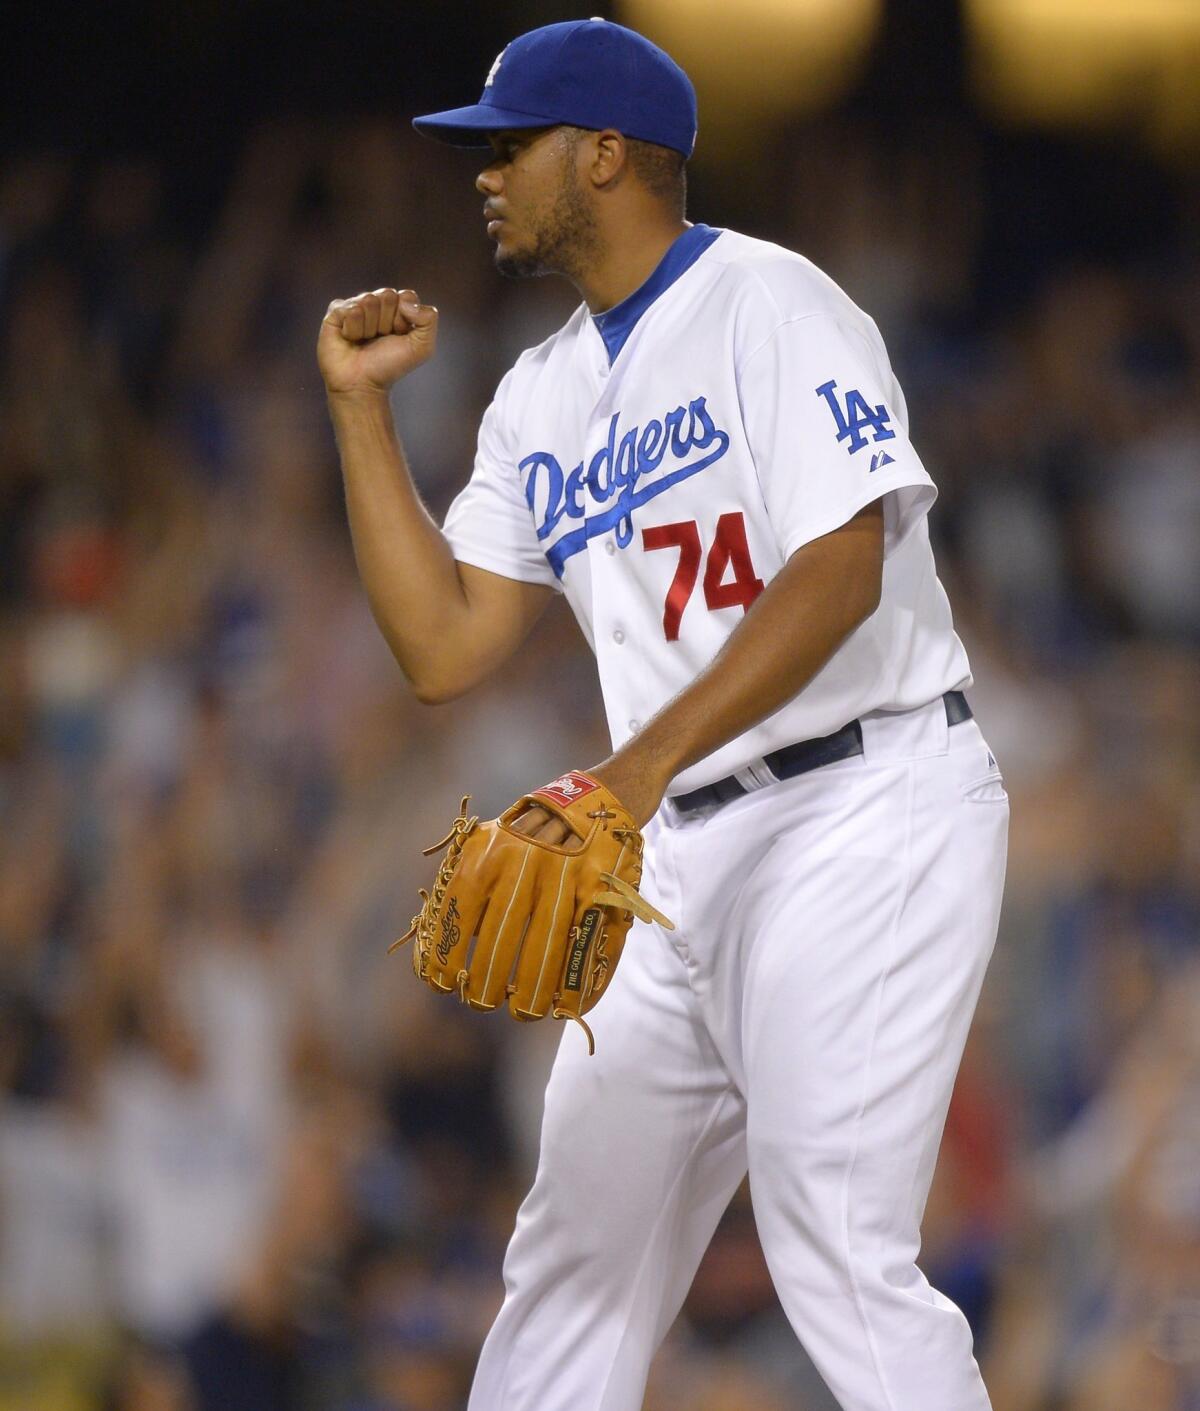 Dodgers closer Kenley Jansen has retired 32 of the last 33 batters he's faced.